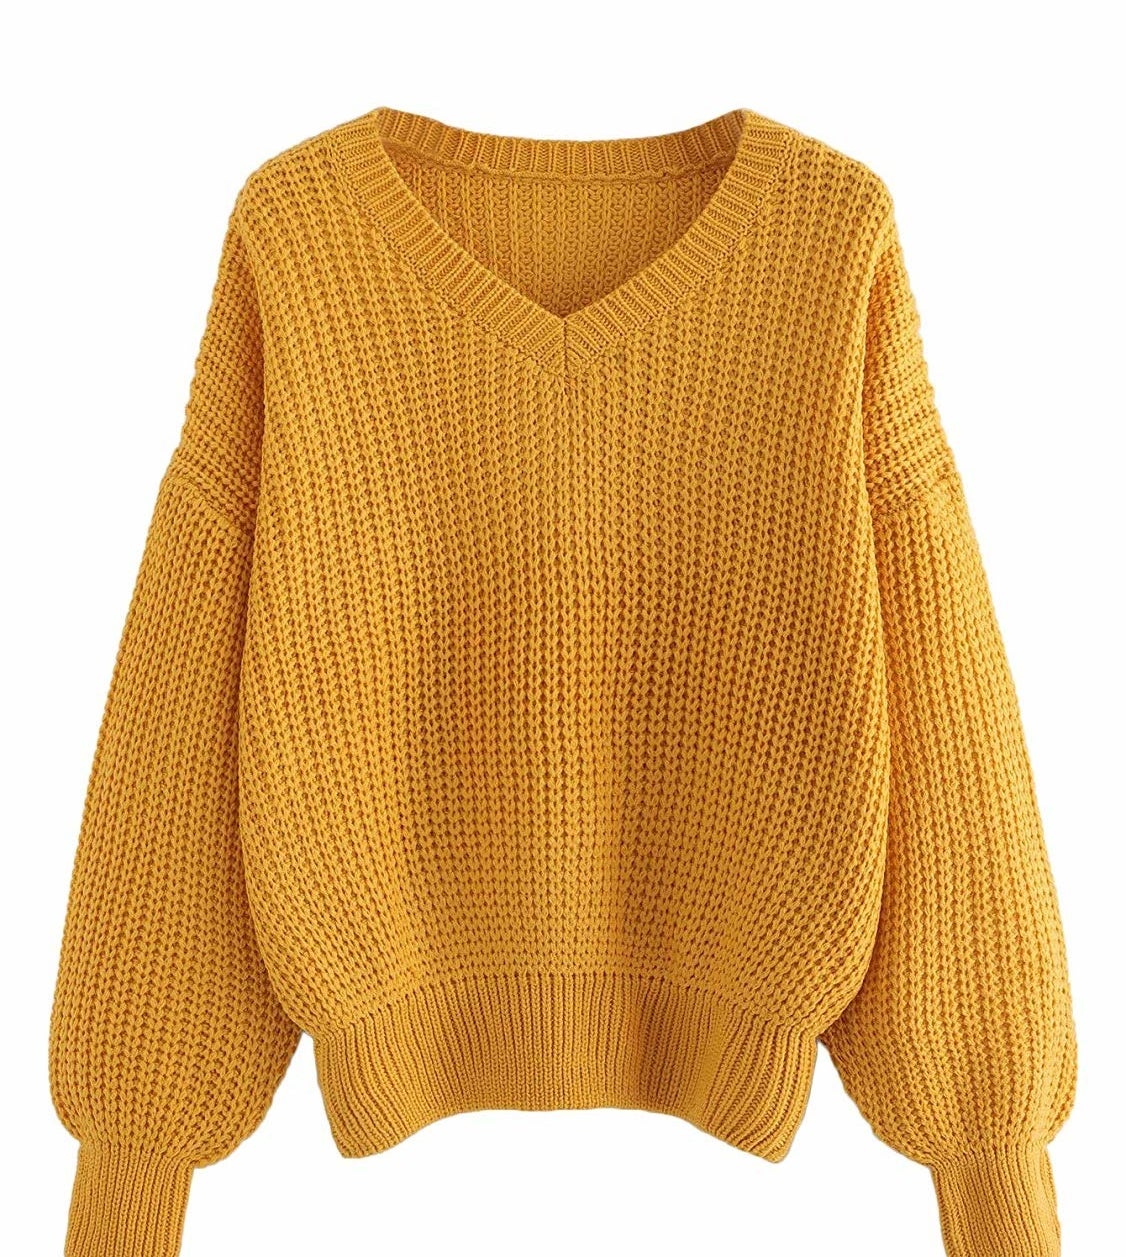 24 Affordable And Comfy Sweaters You'll Almost Never Want To Take Off